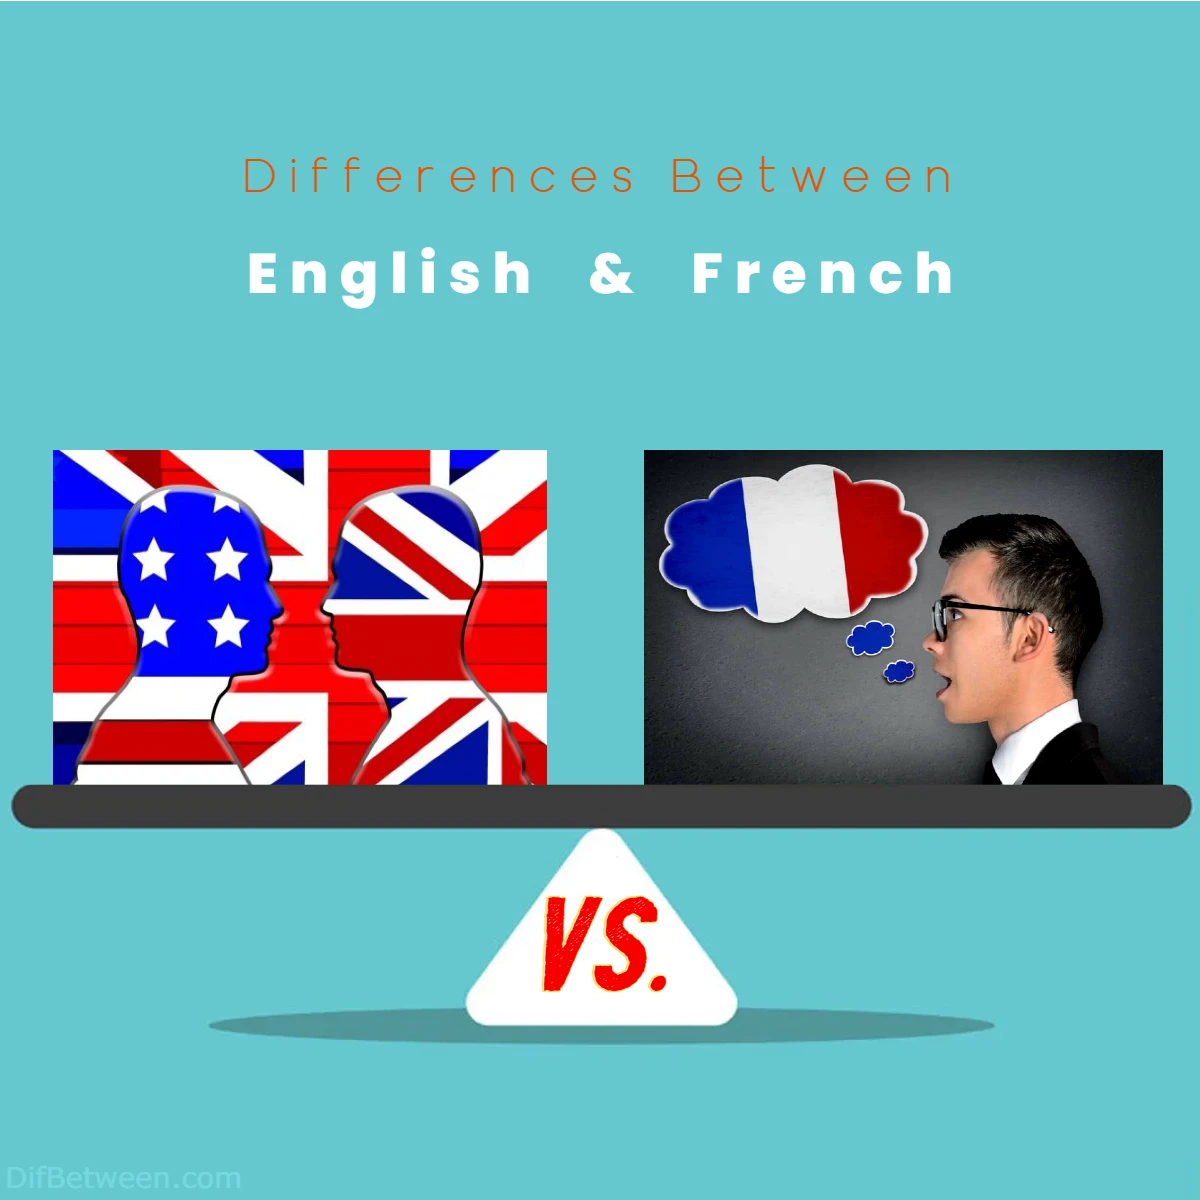 Differences Between English vs French